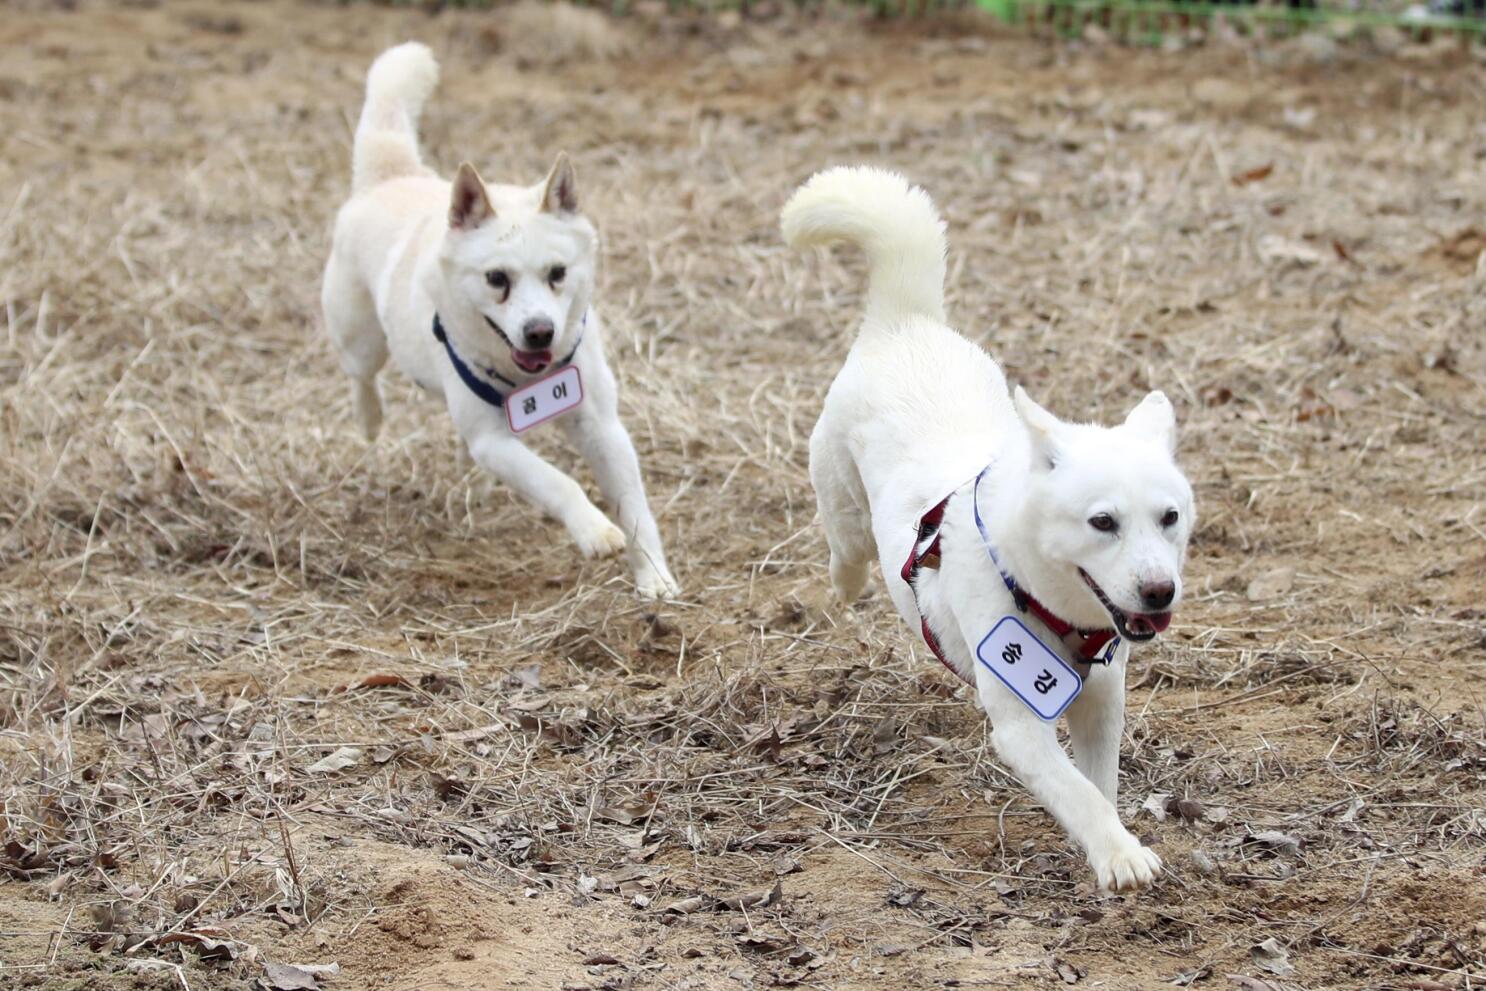 Zoo V Man Xvideo - Dogs gifted by North's Kim resettle in South Korean zoo | AP News